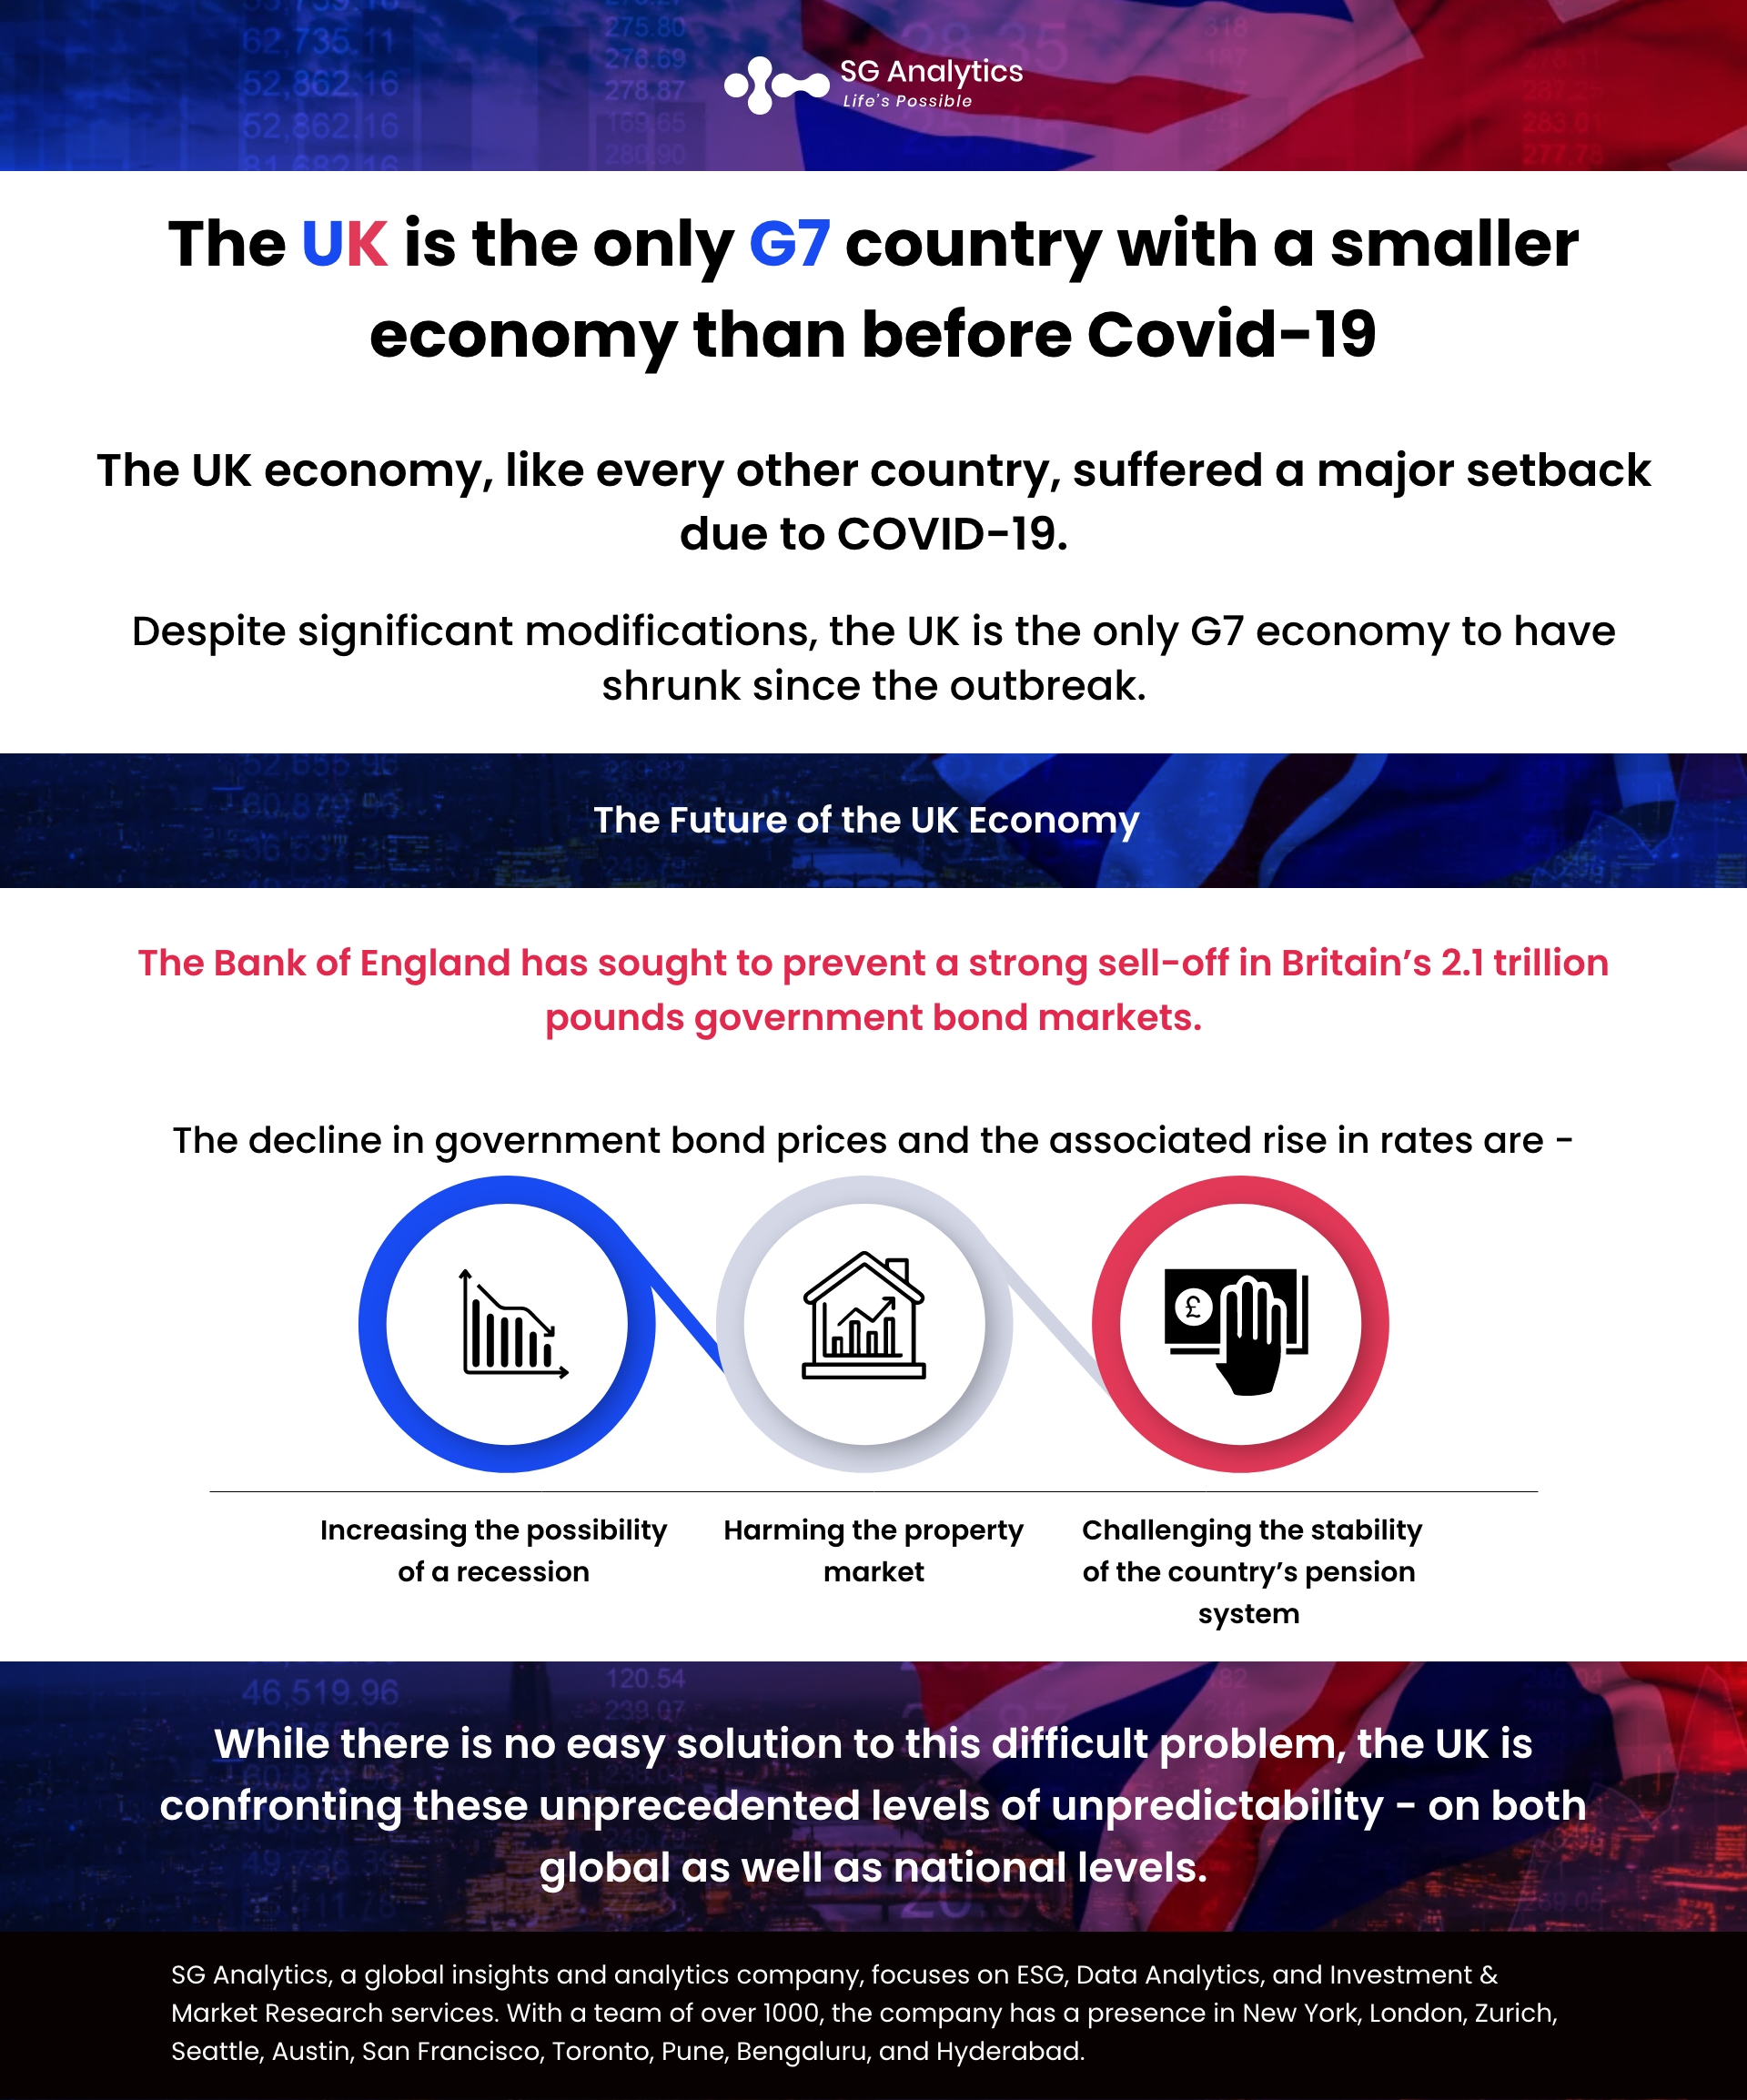 SGAnalytics_Infographic_UK is only G7 country with smaller economy than before Covid-19